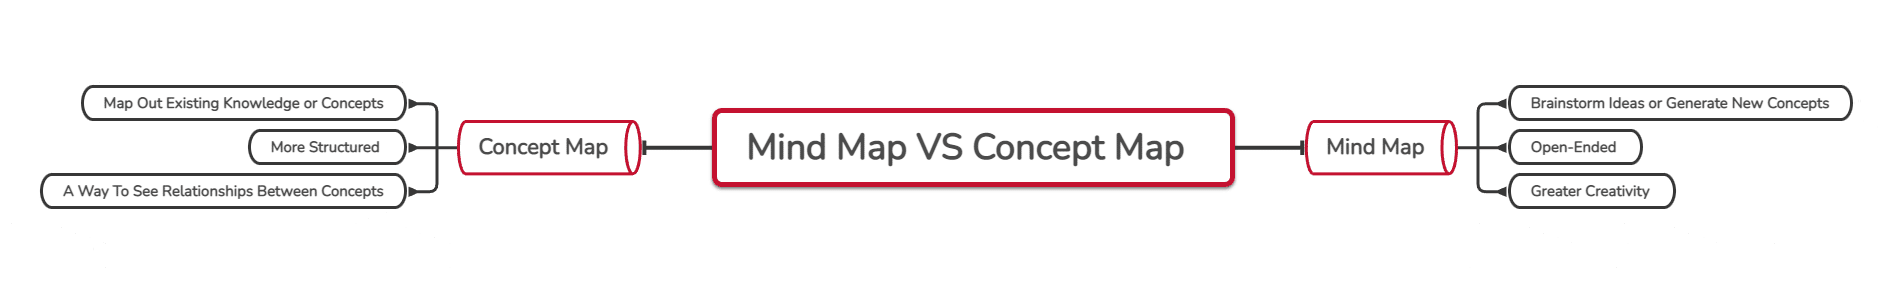 mind map vs concept map differences